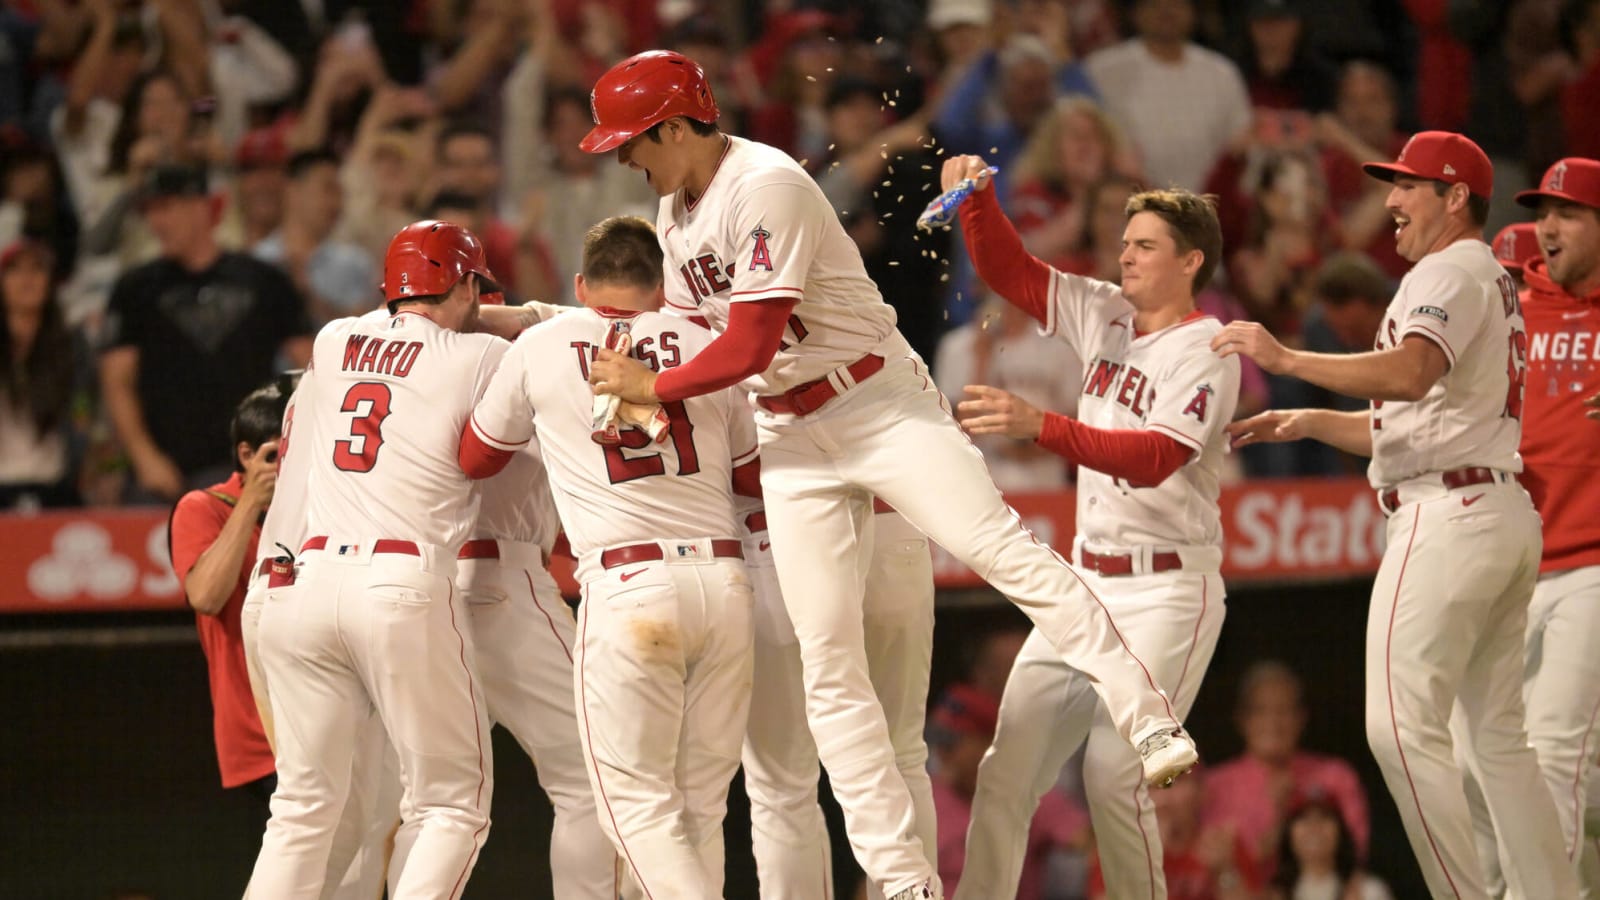 Angels 2, White Sox 1: Bummer’s wild pitch leads to walk-off loss